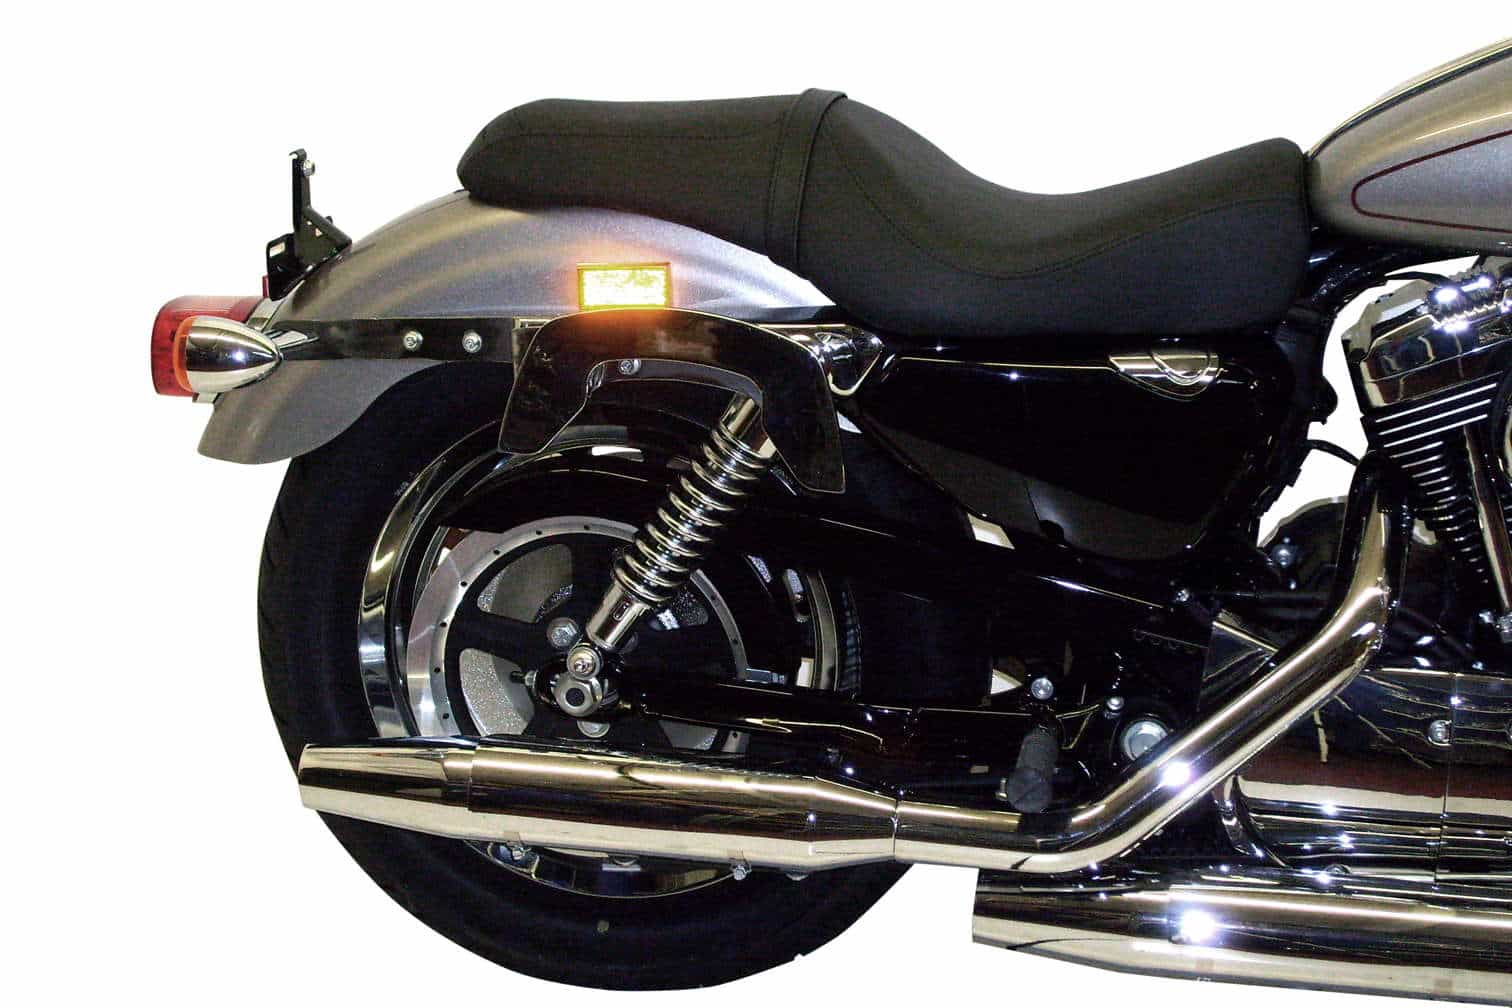 C-Bow sidecarrier for Harley-Davidson Sportster 883 Roadster/Iron 883/Super Low/ 1200 Custom/Forty-Eight/Seventy-Two/ 883 Custom (-2020)